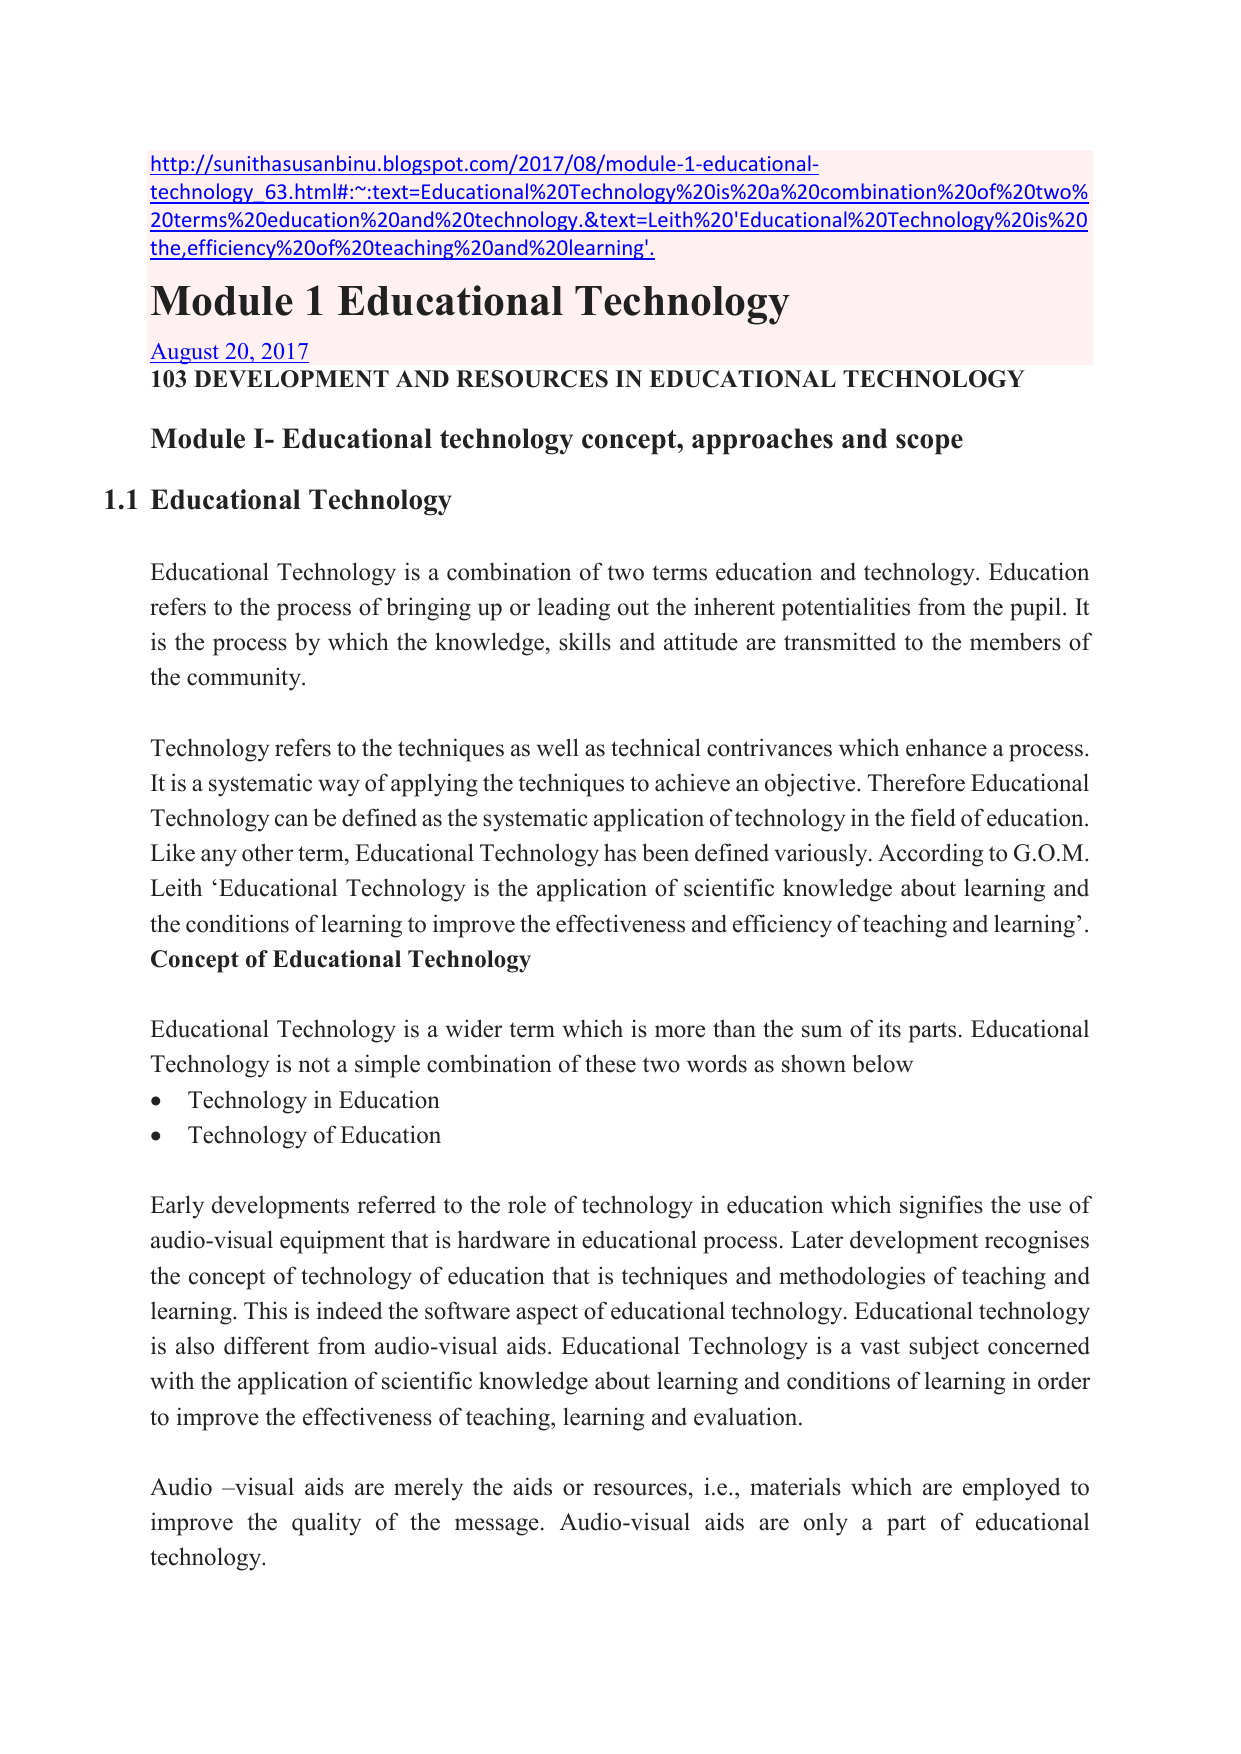 short note on educational technology